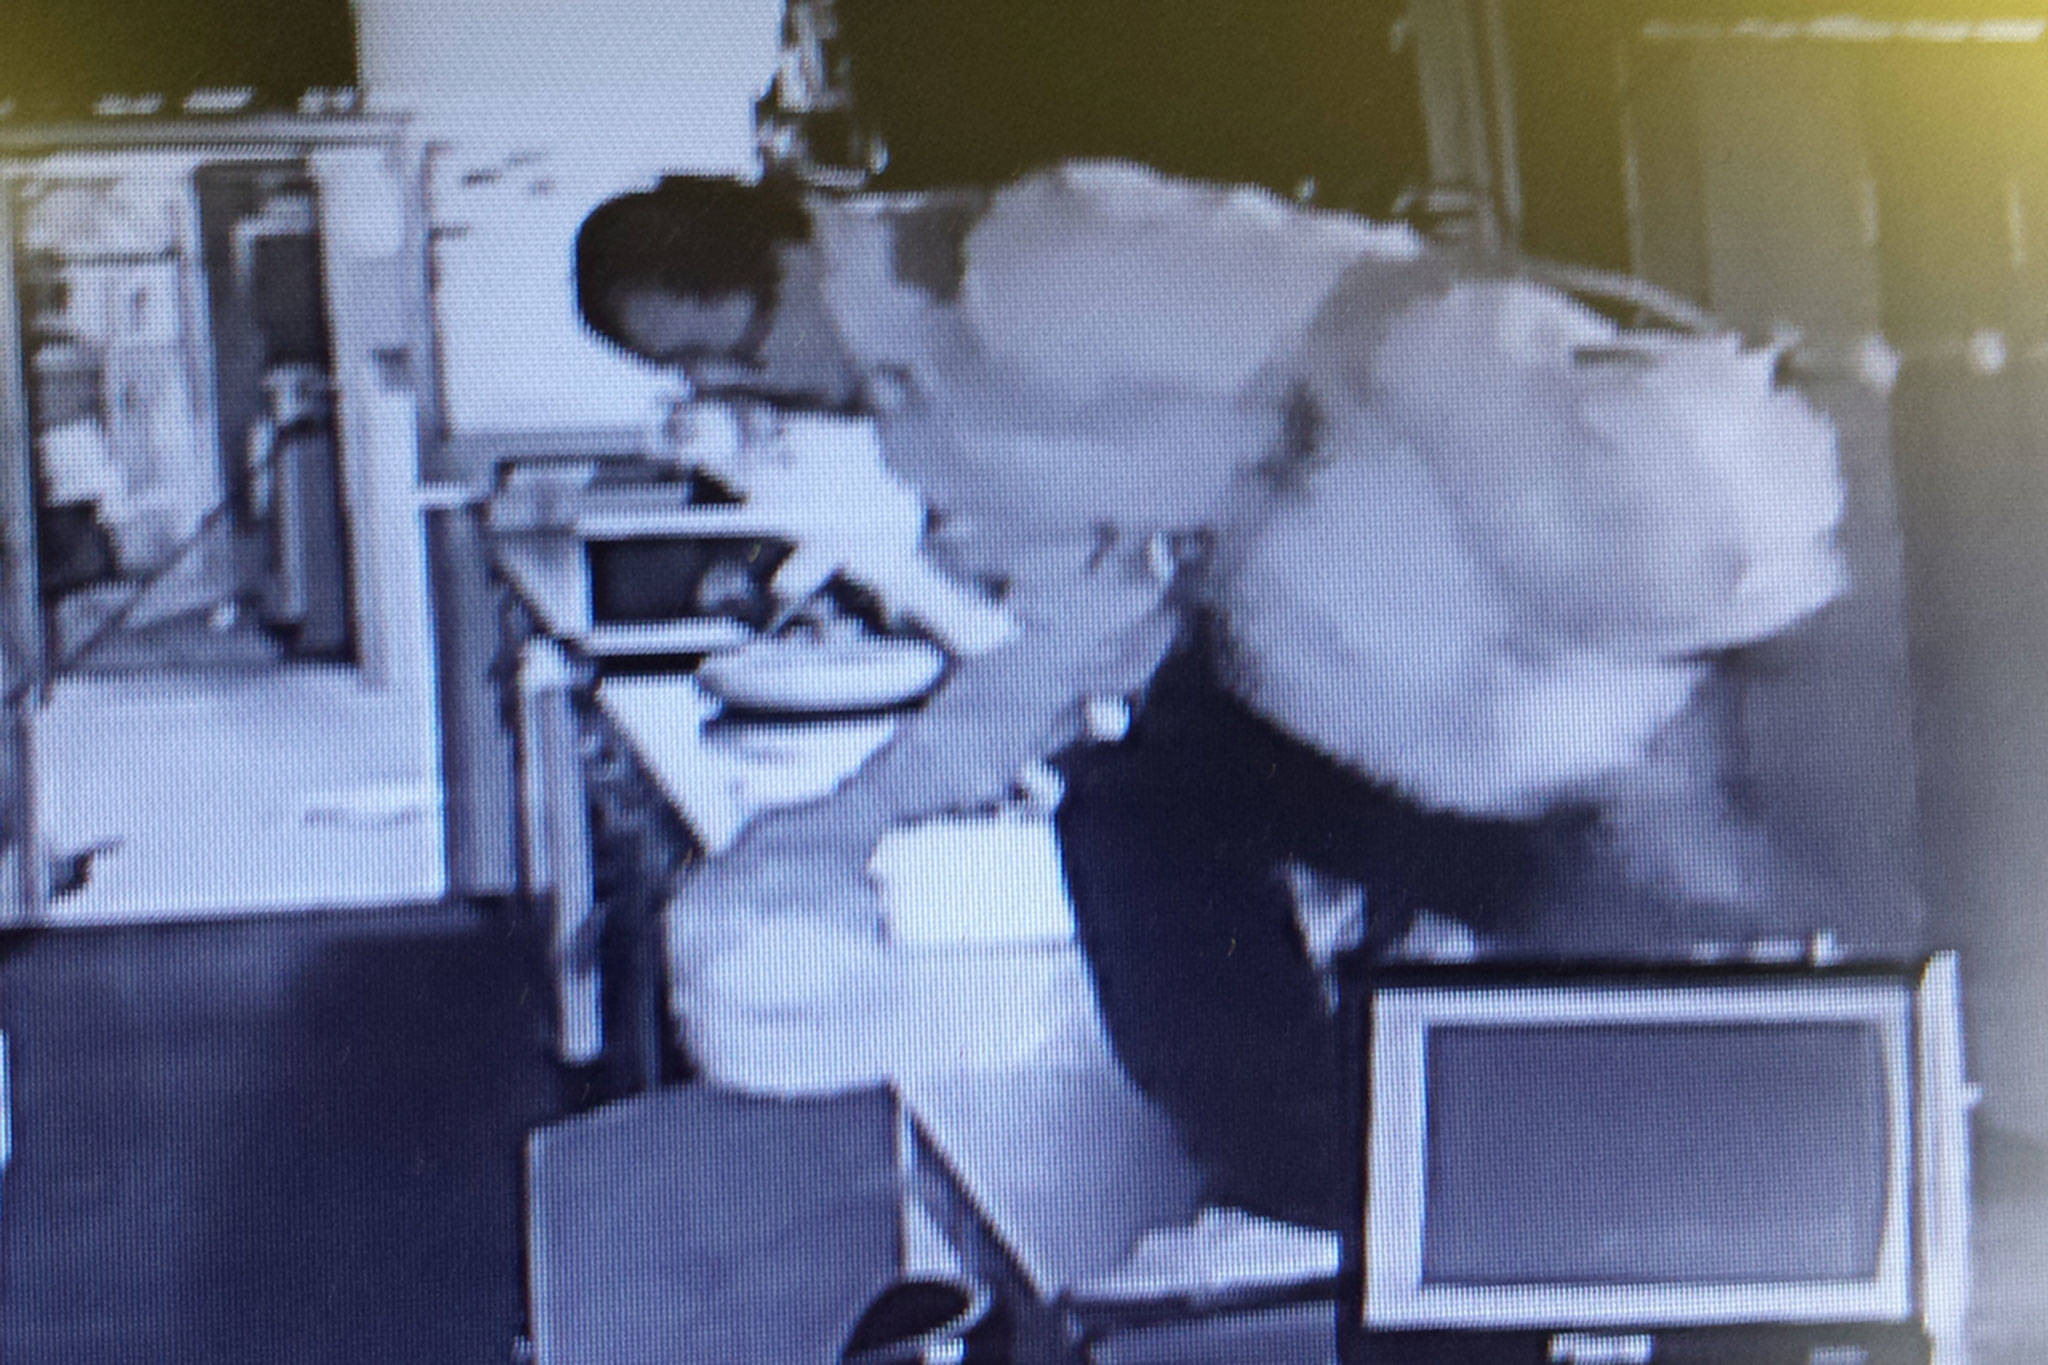 Sequim police officers are seeking a man caught on video at the Sequim VFW post during a burglary Sunday. (Sequim VFW)